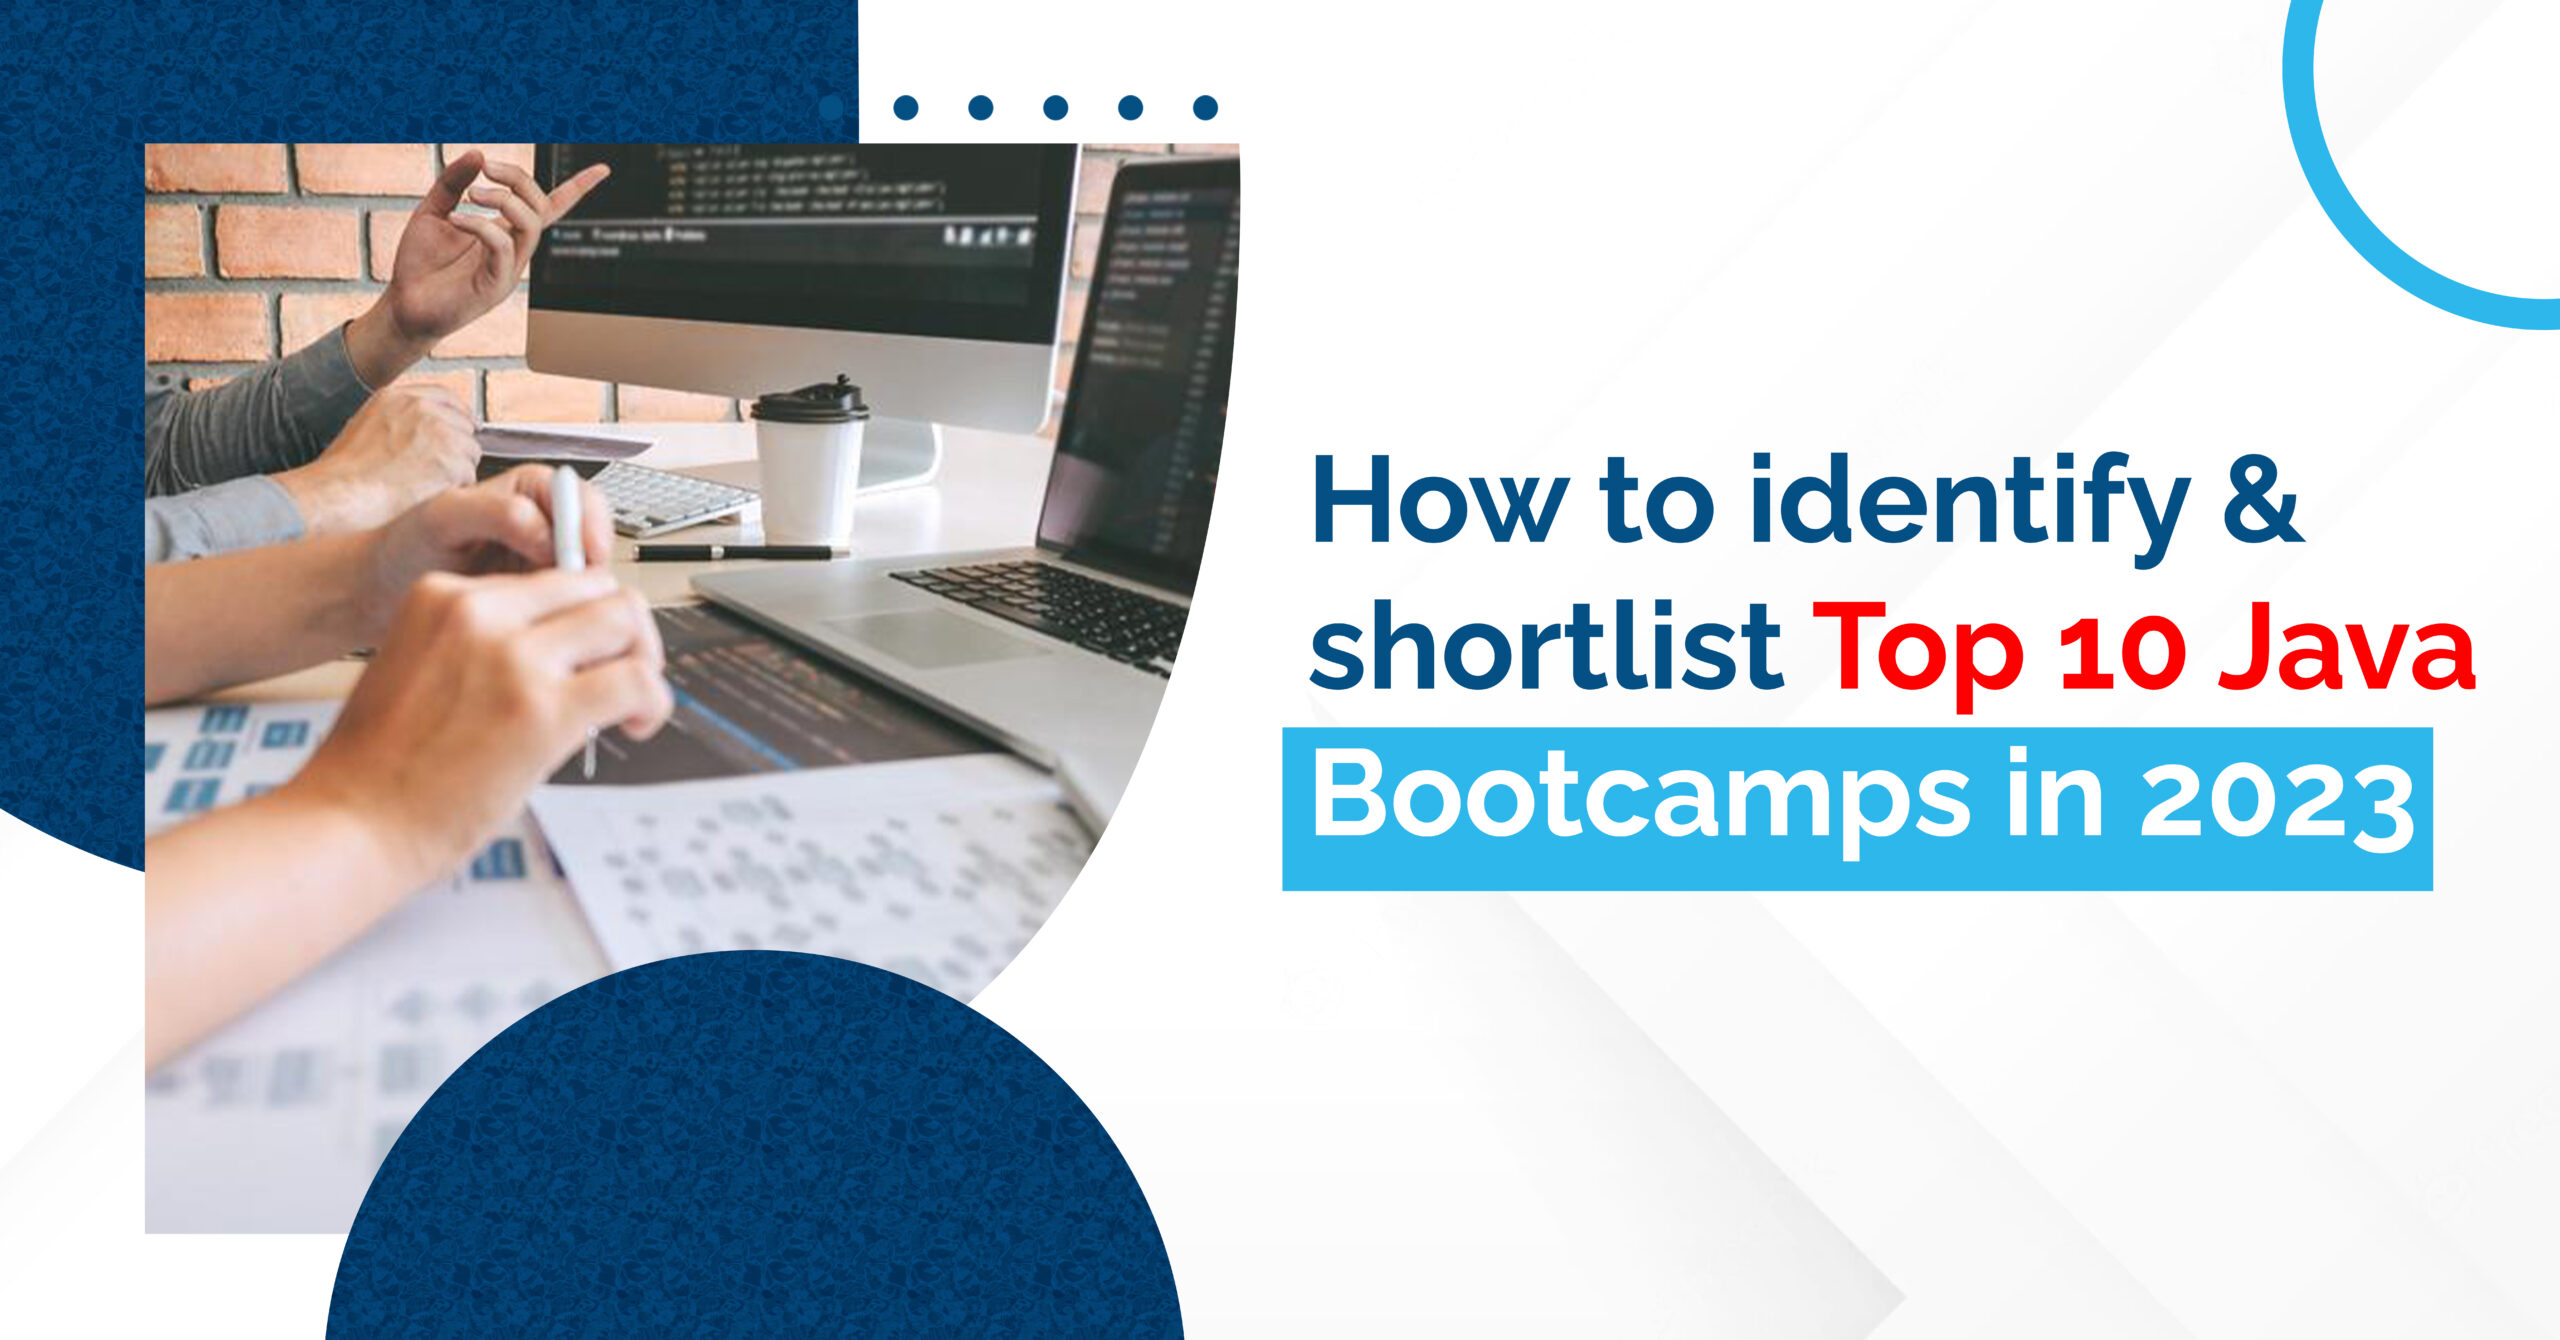 How to identify & shortlist Top 10 Java Bootcamps in 2023